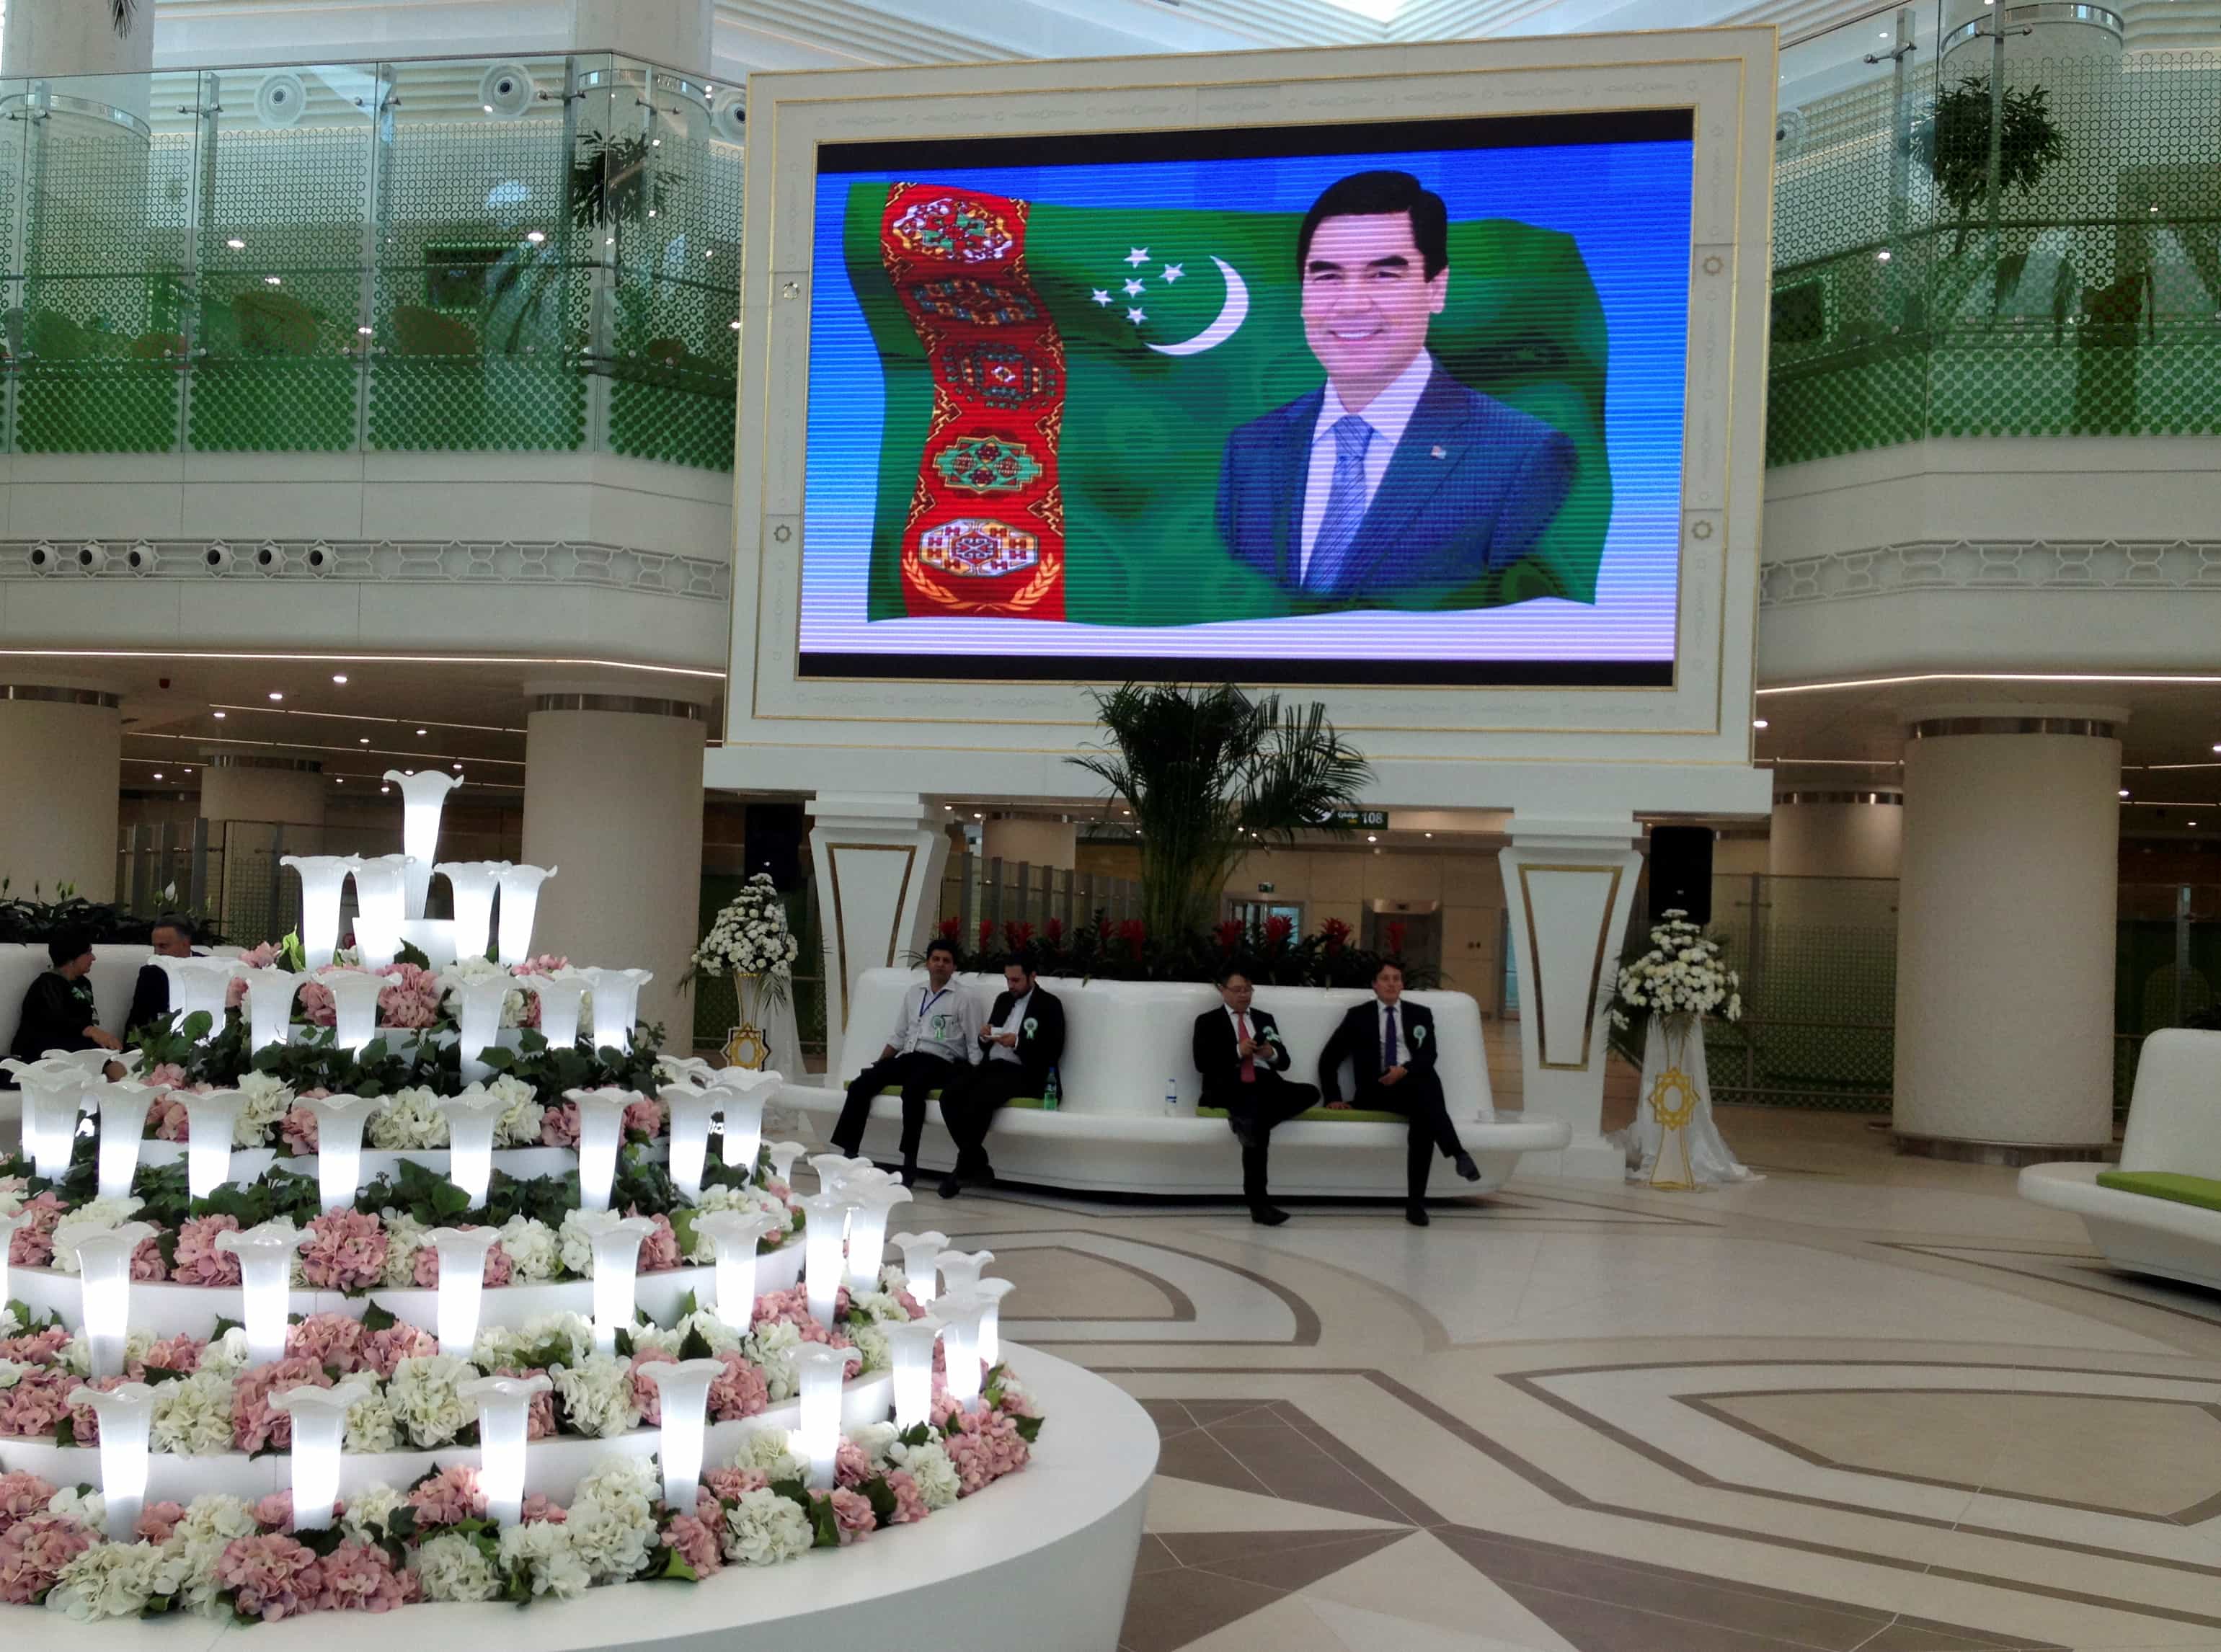 A screen showing a portrait of President Gurbanguly Berdimuhamedov is seen during the official opening of a newly built airport in Ashgabat, Turkmenistan, 17 September 2016, REUTERS/Marat Gurt